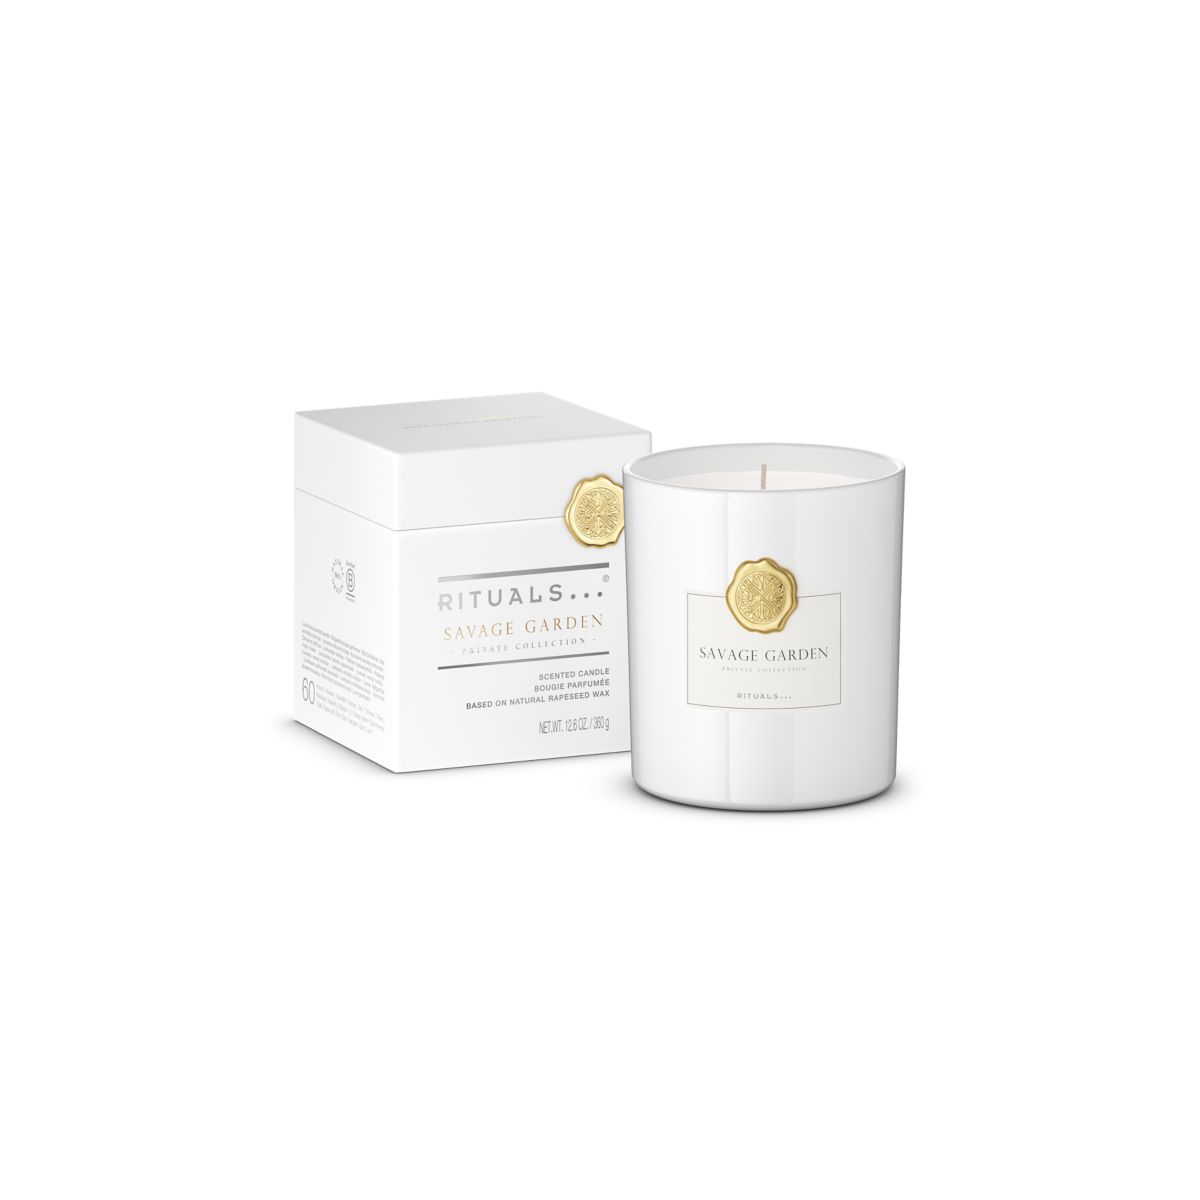 Rituals Savage Garden Scented Candle